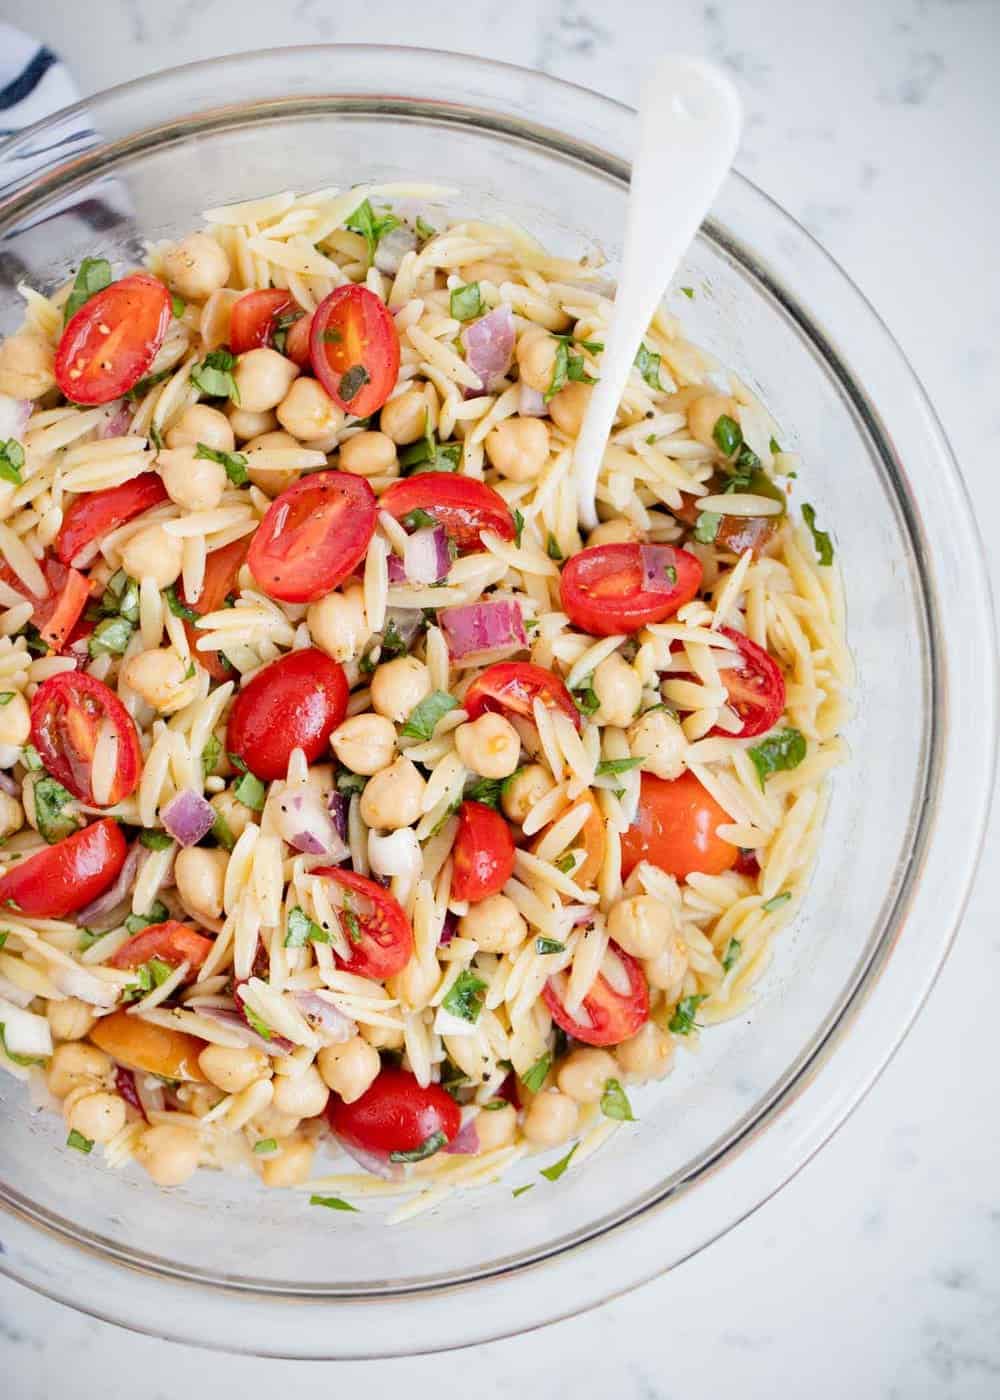 Orzo pasta salad in a bowl with a spoon.